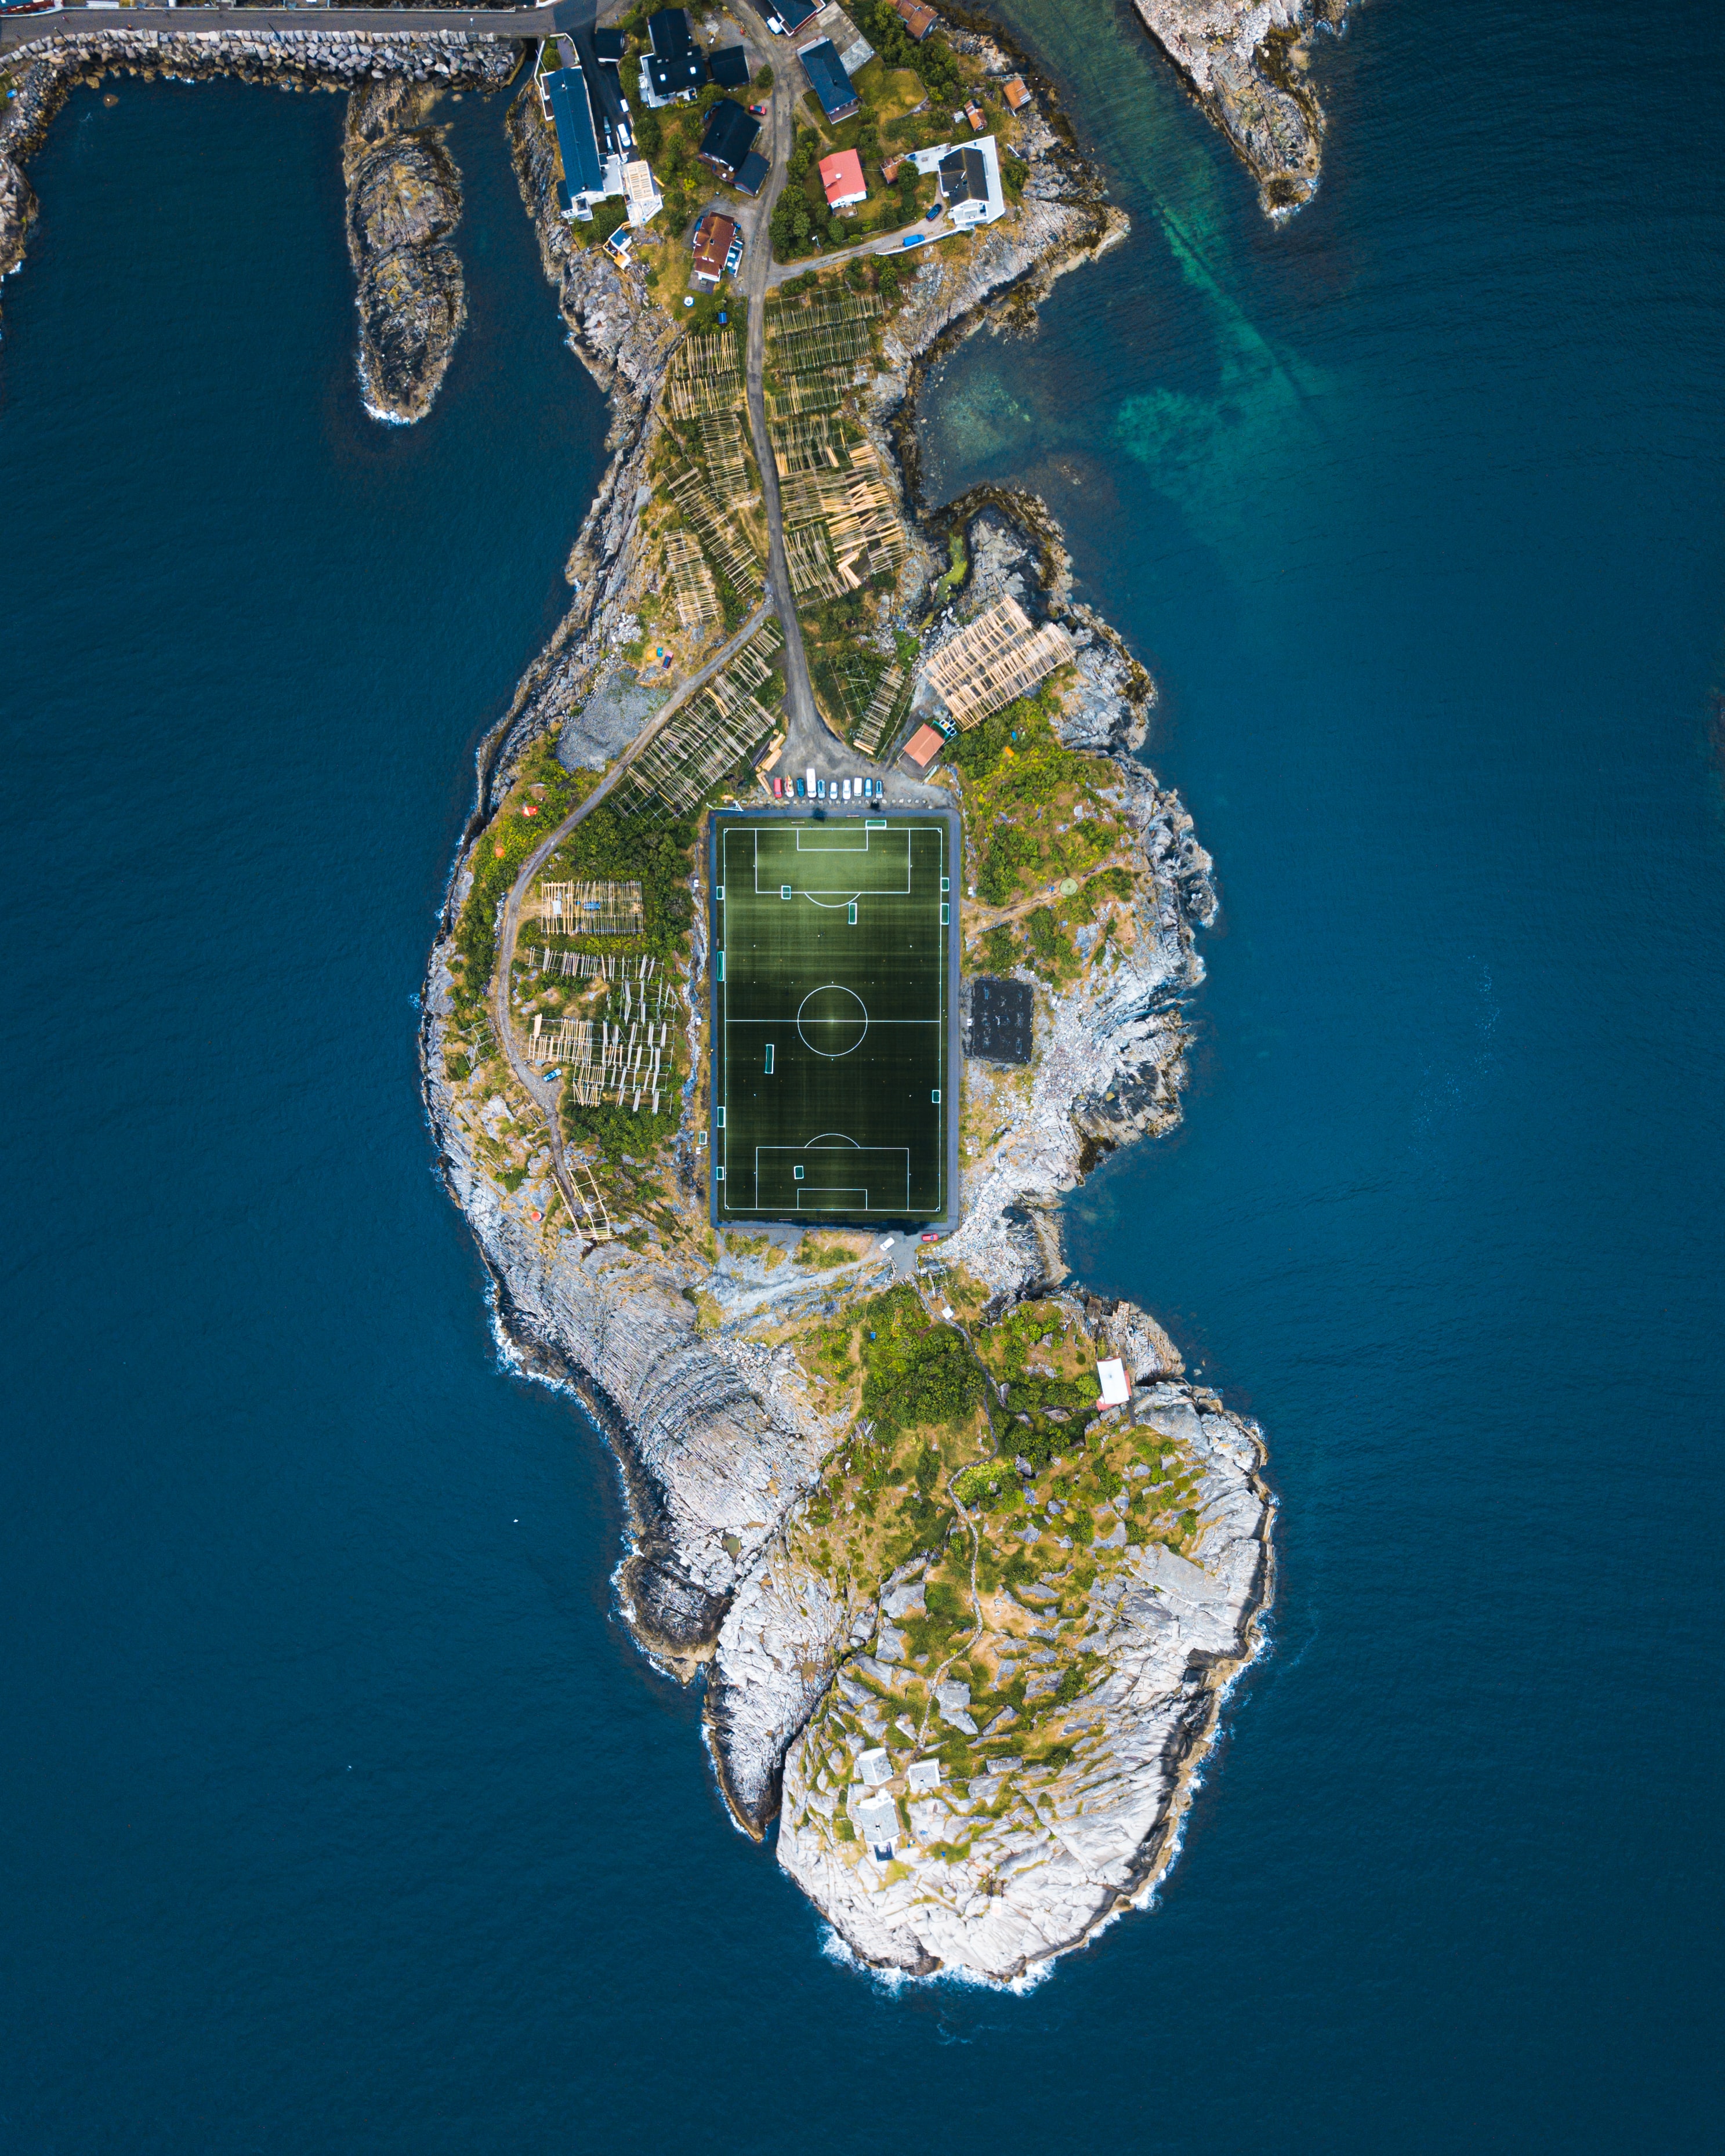 stadium, sea, island, nature, city, view from above